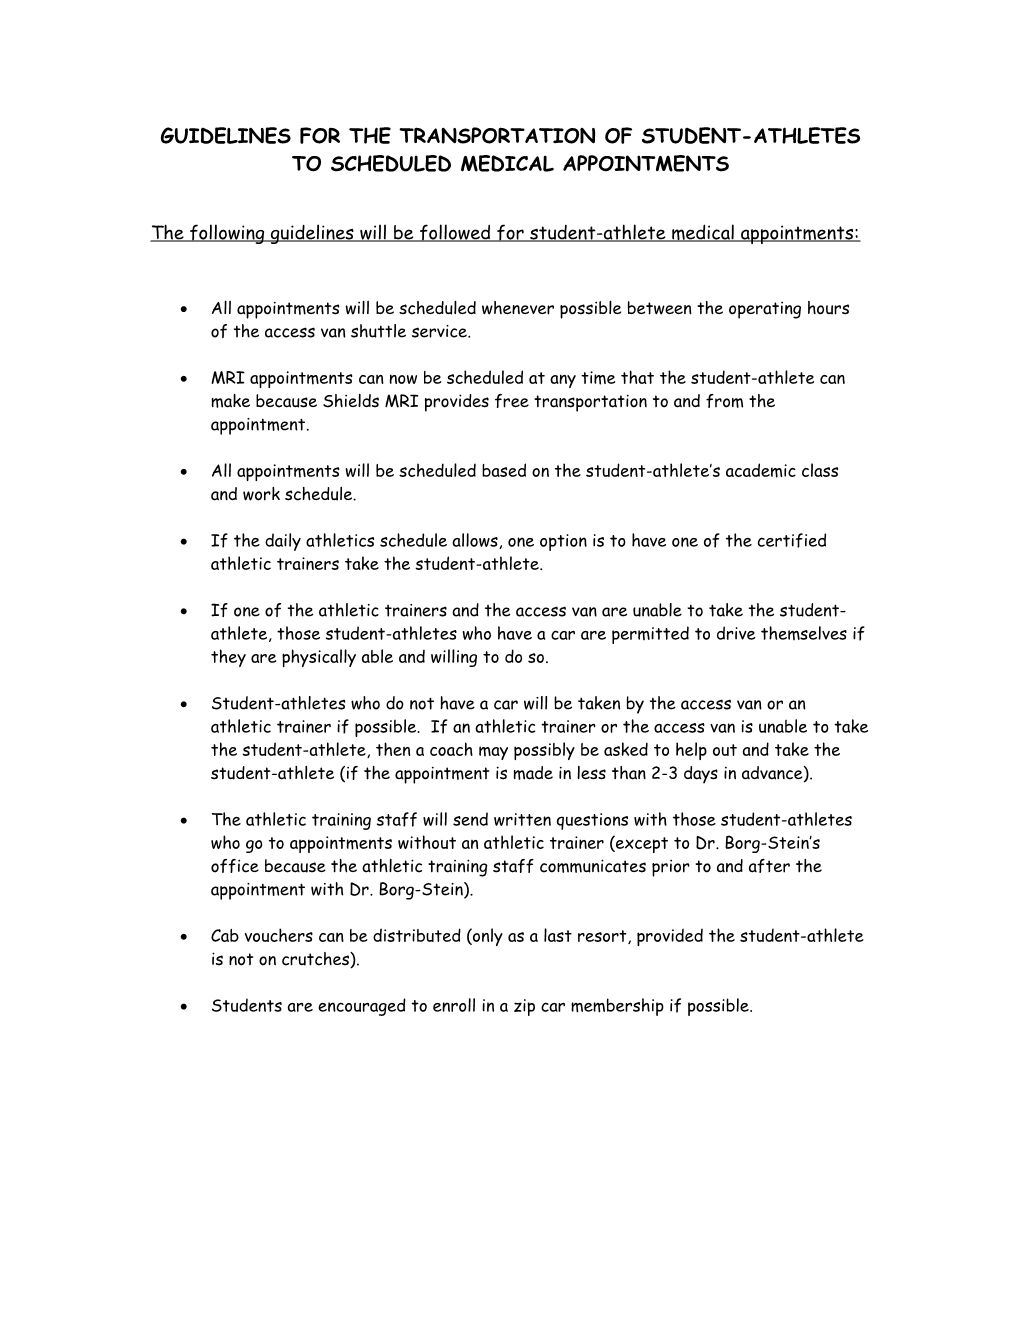 Recommended Guidelines for Transportation of Athletes to Scheduled Appointments